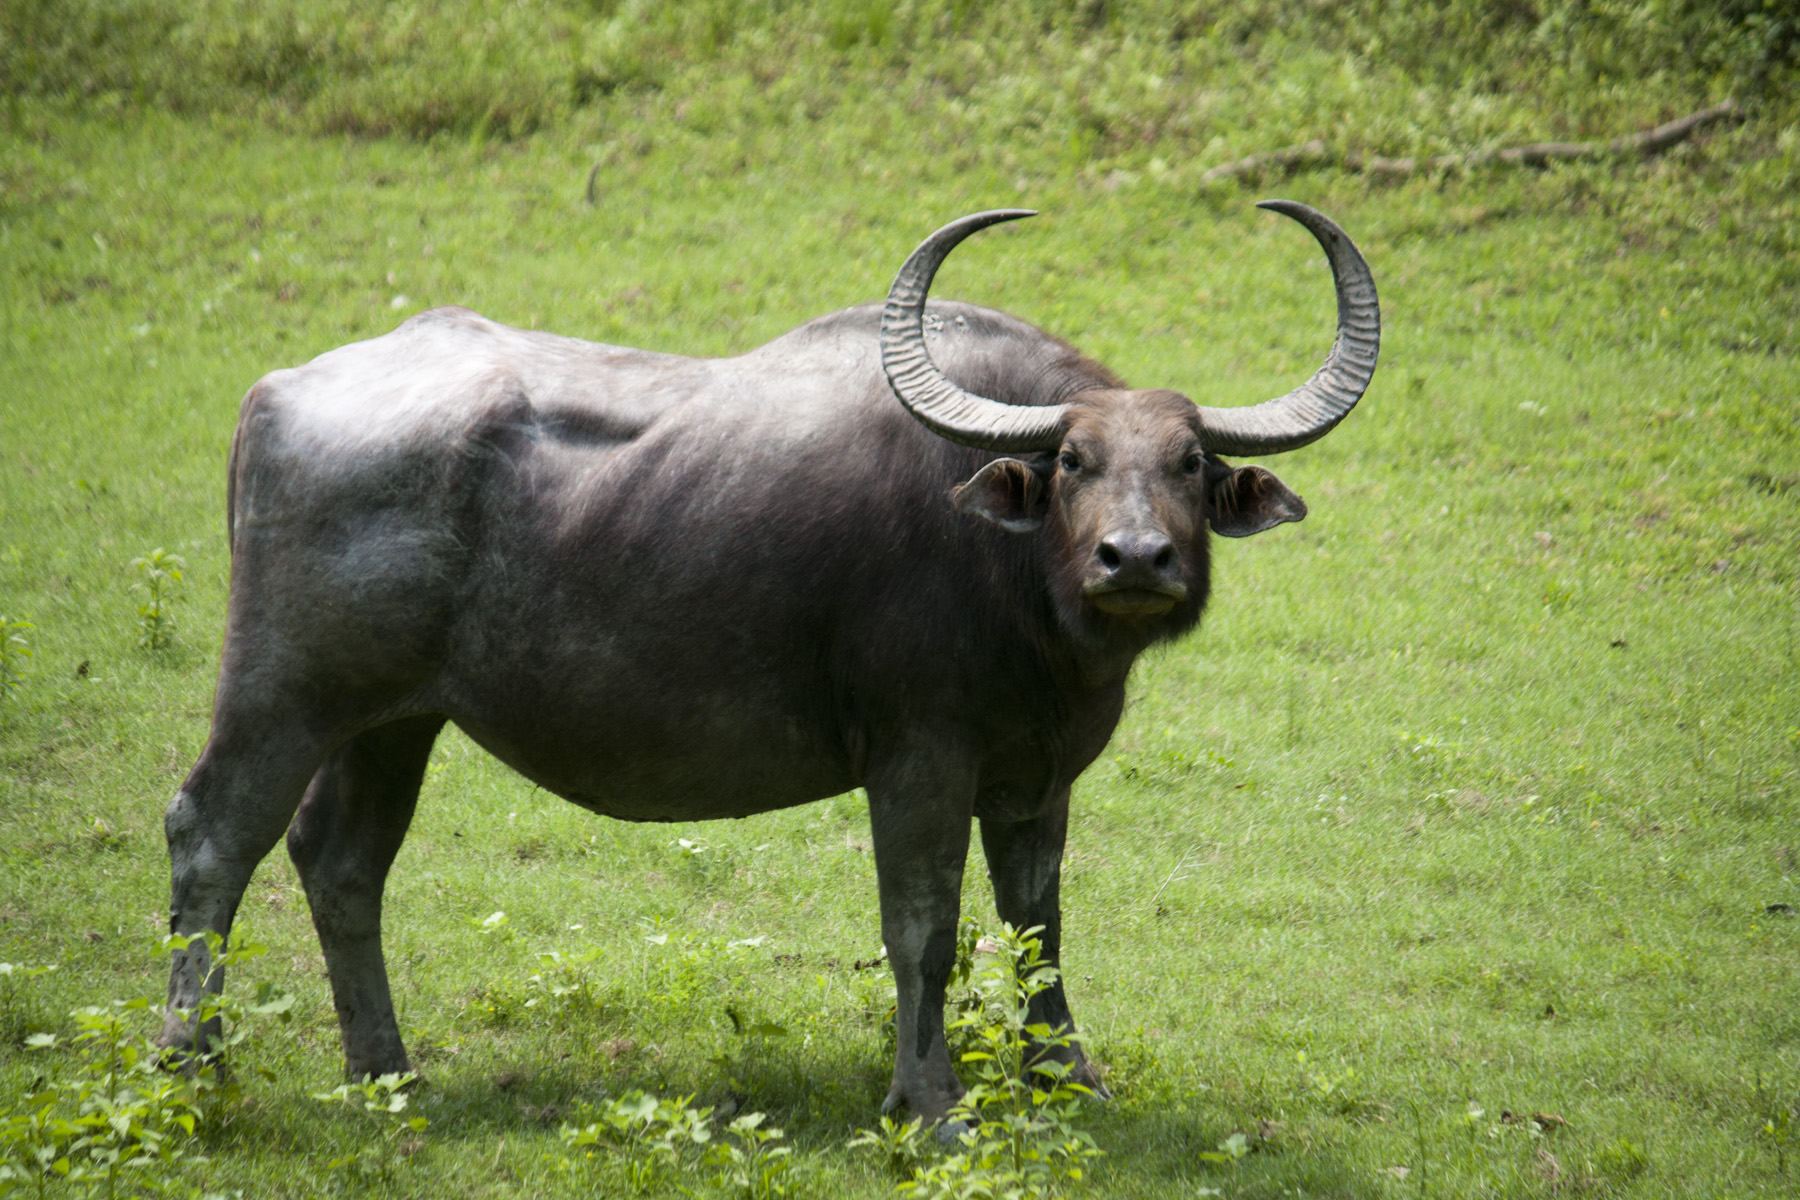 Short study and facts about Wild buffalo | Kine | Pinterest ...